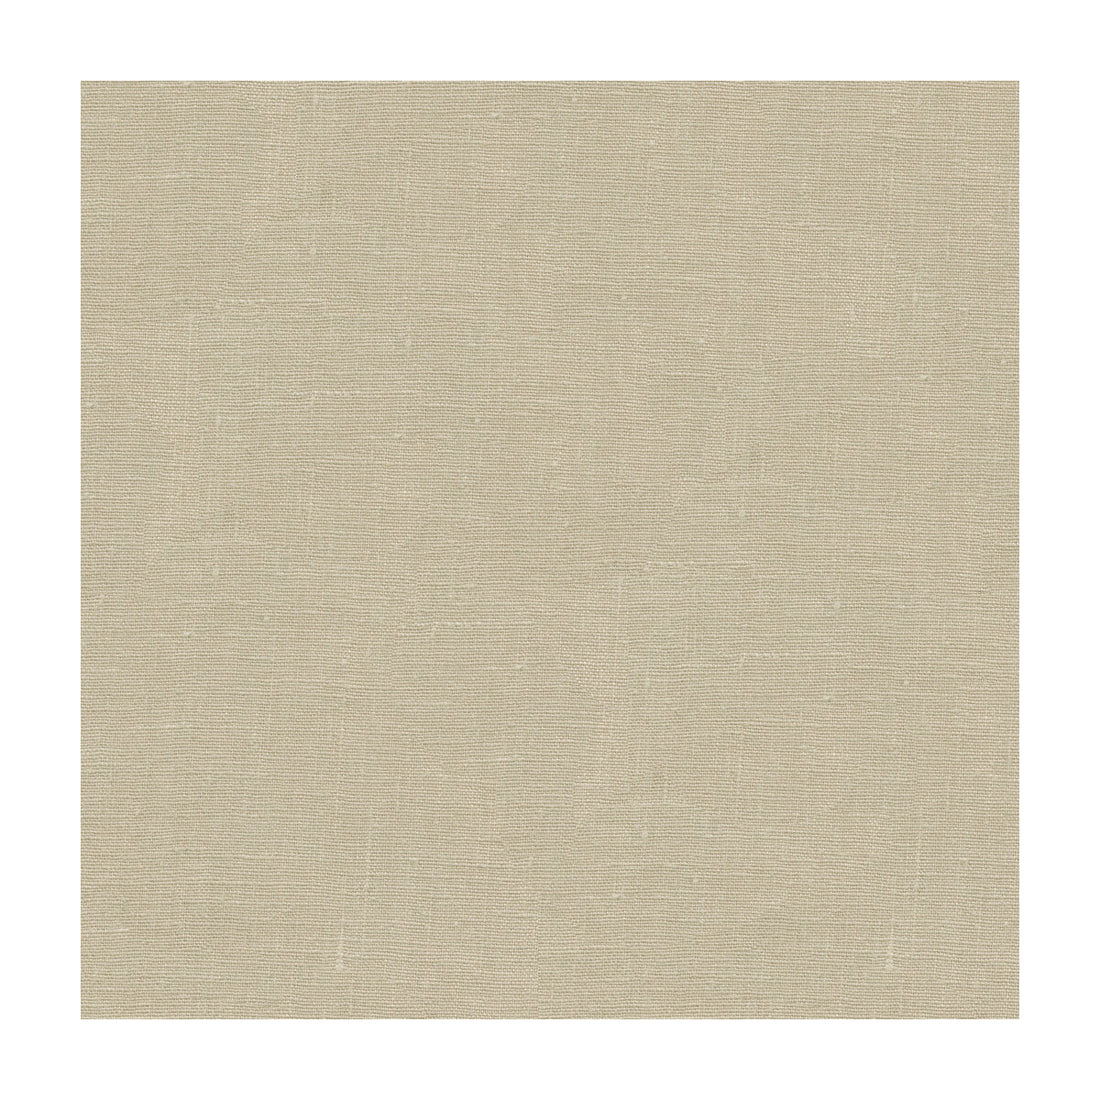 Dublin Linen fabric in biscuit color - pattern 2012175.716.0 - by Lee Jofa in the Colour Complements II collection